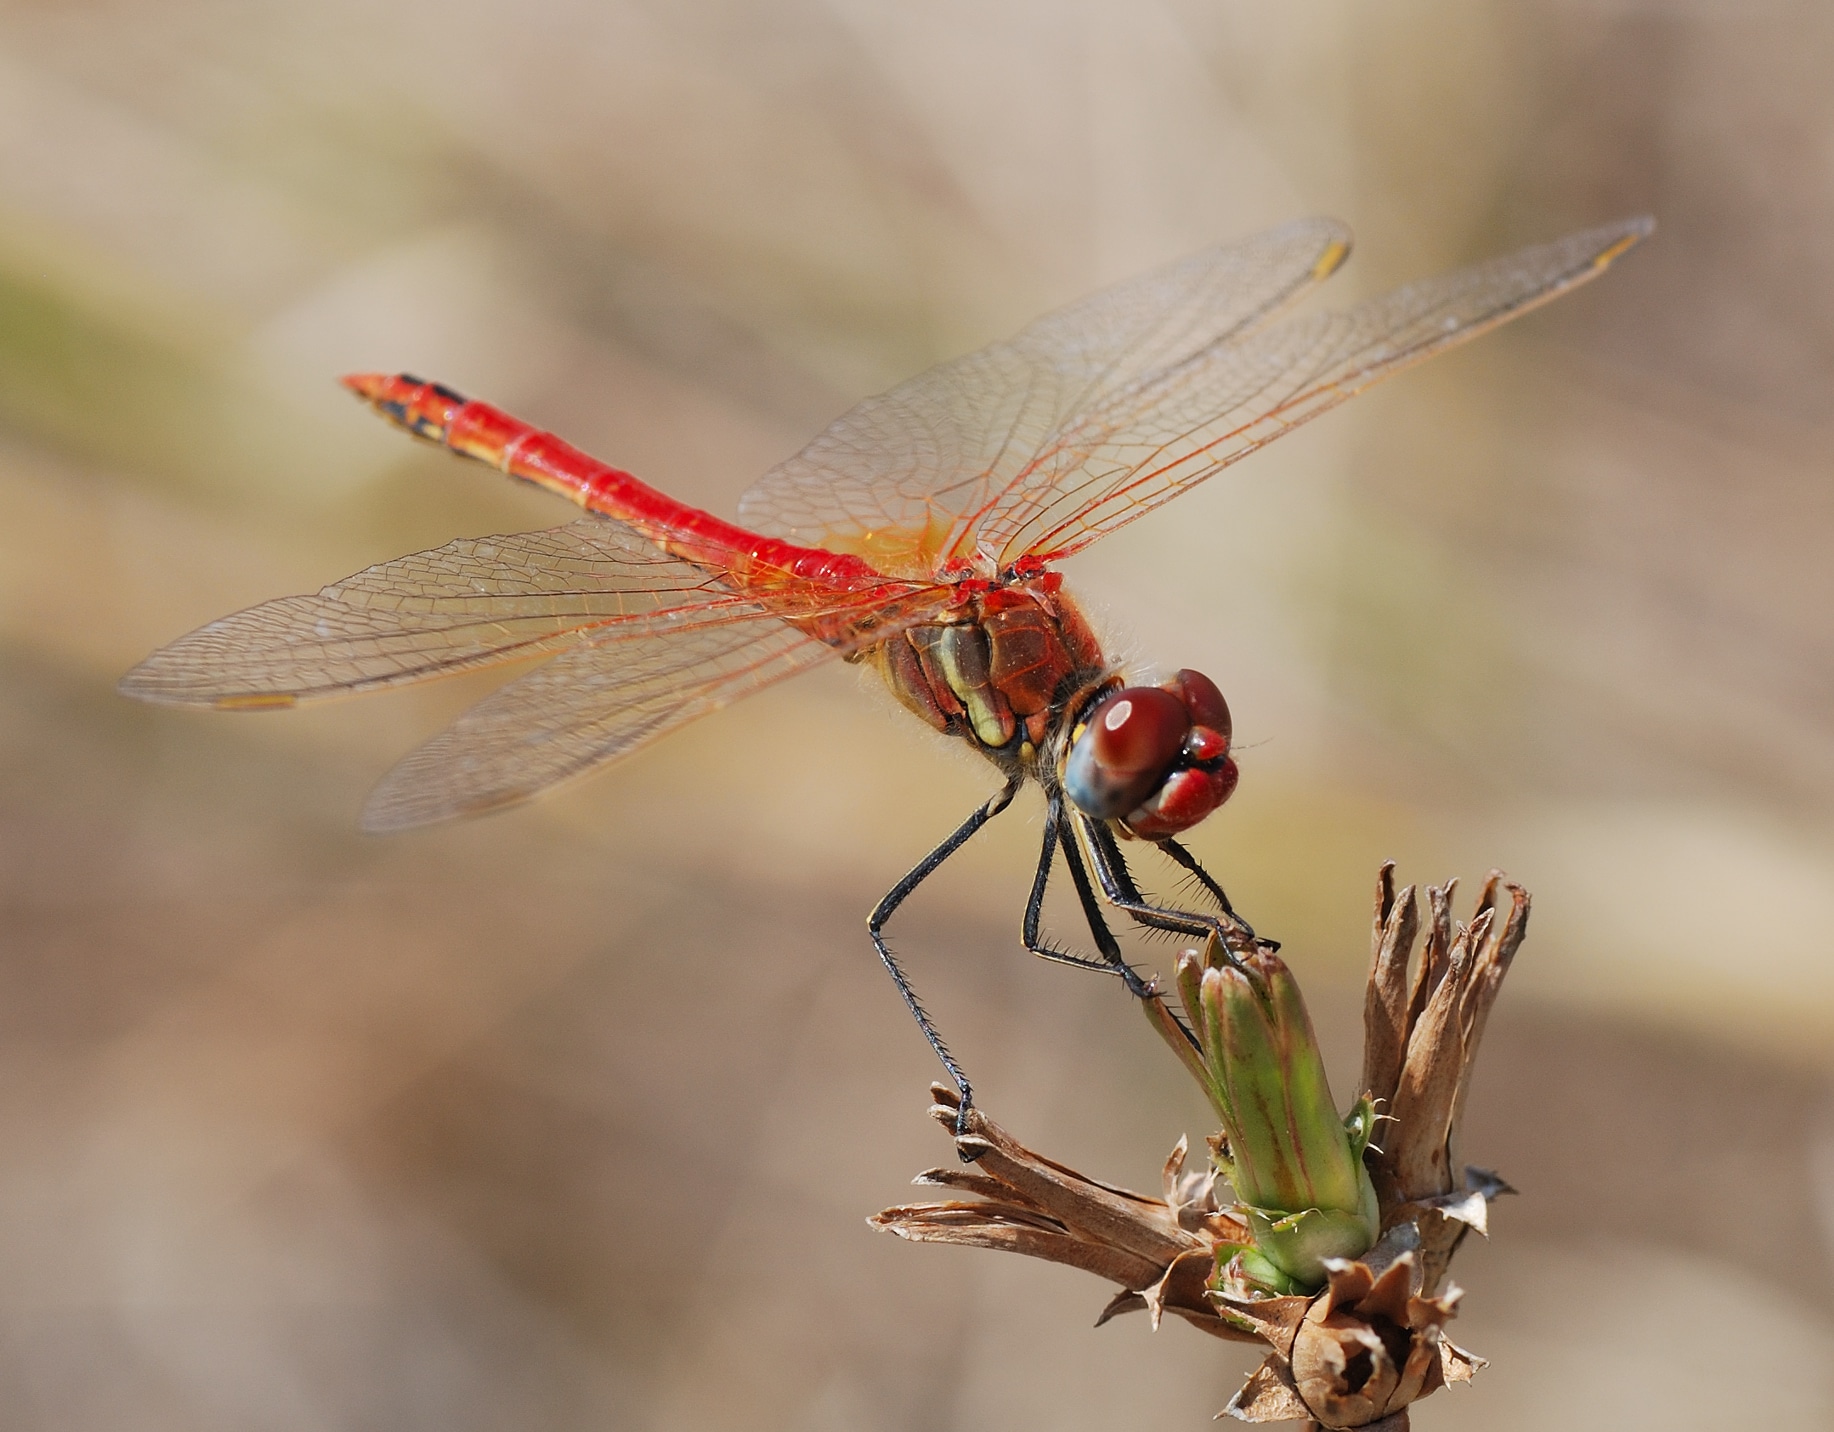 Biblical Meaning of Red Dragonfly